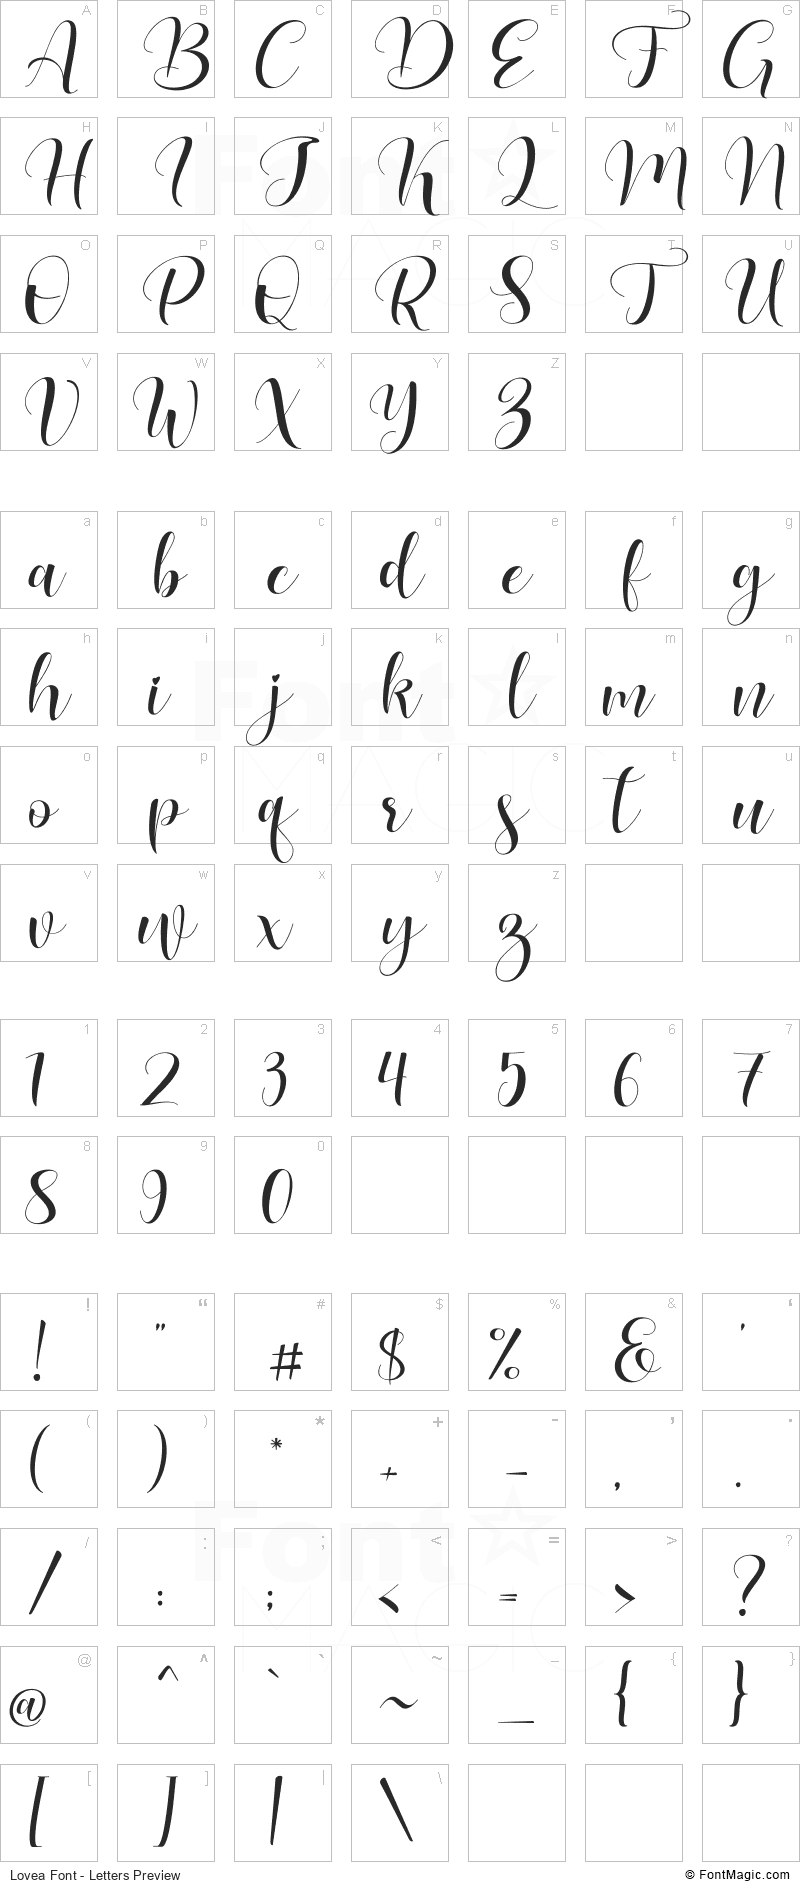 Lovea Font - All Latters Preview Chart